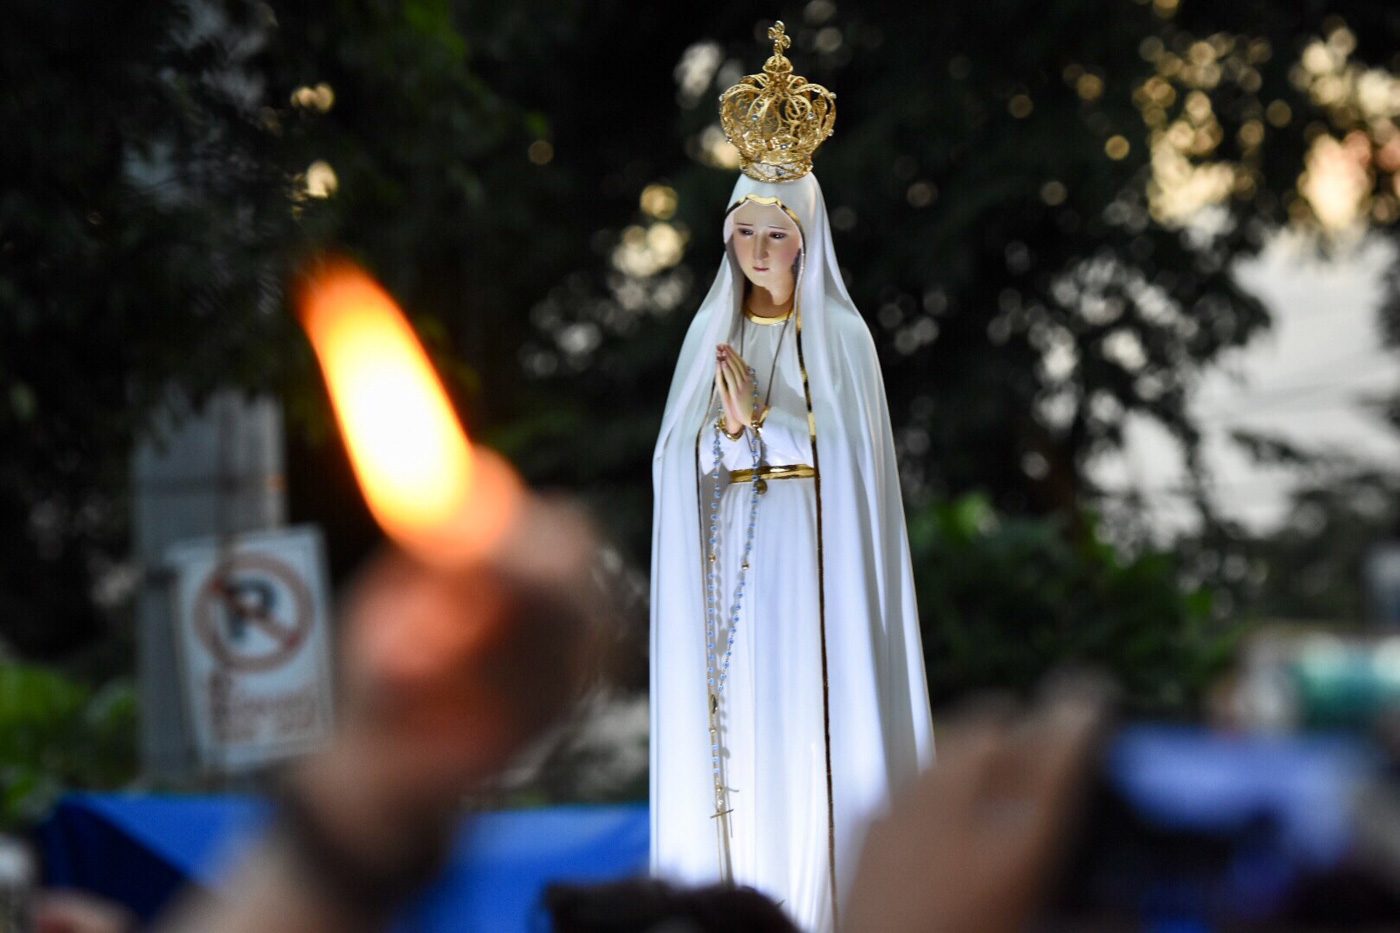 WATCH: Our Lady of Fatima returns to EDSA